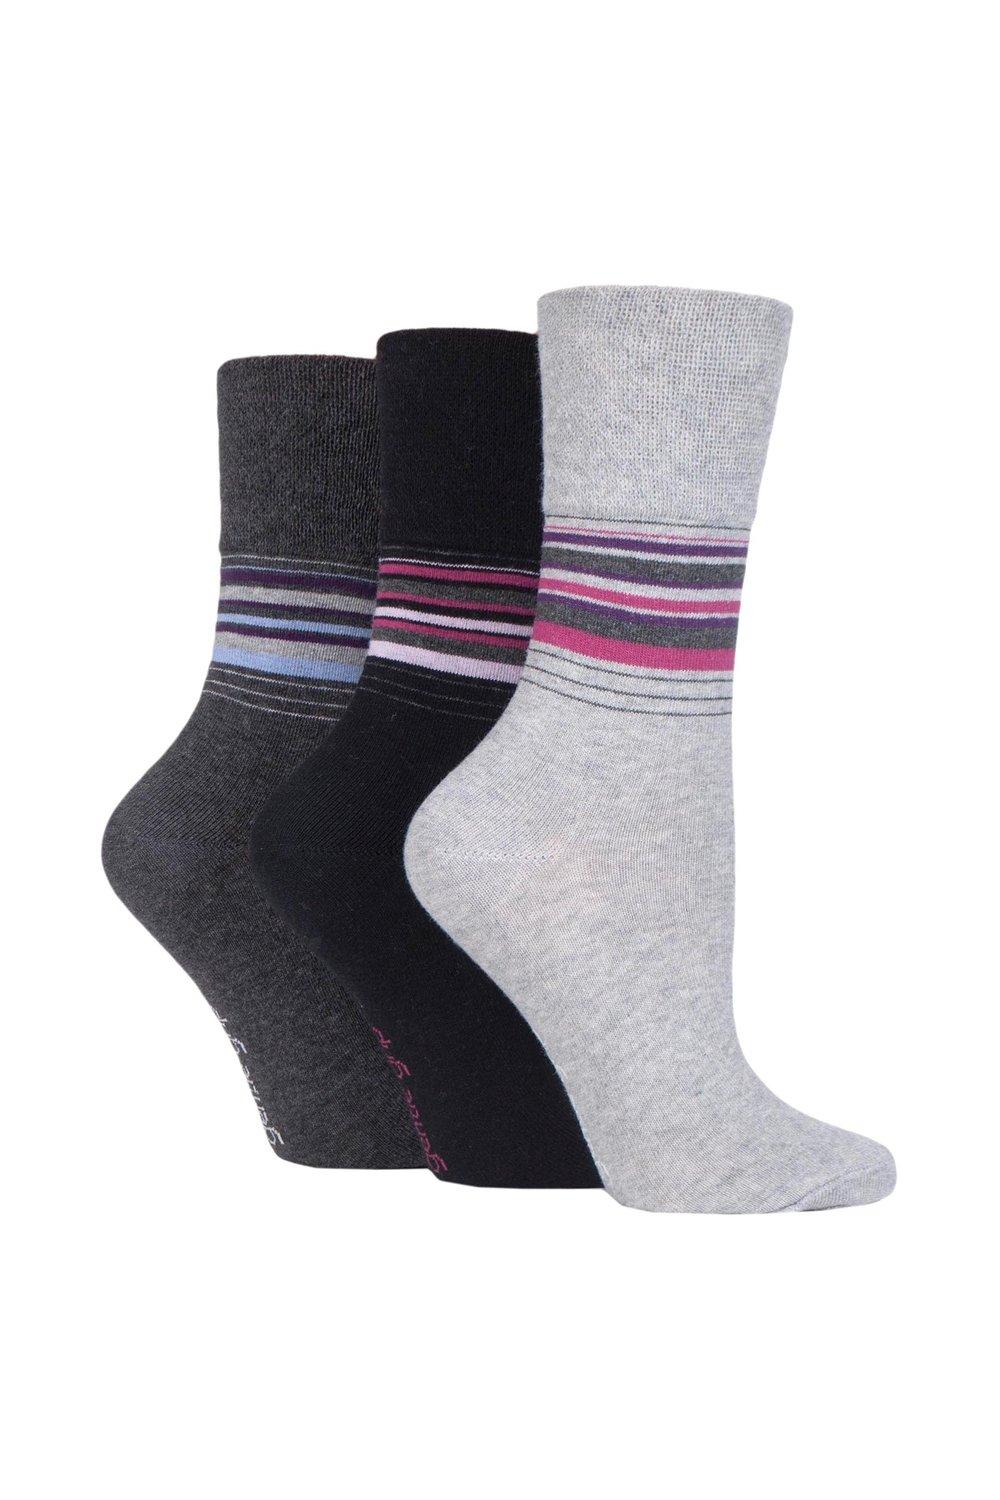 3 Pair Patterned and Striped Socks